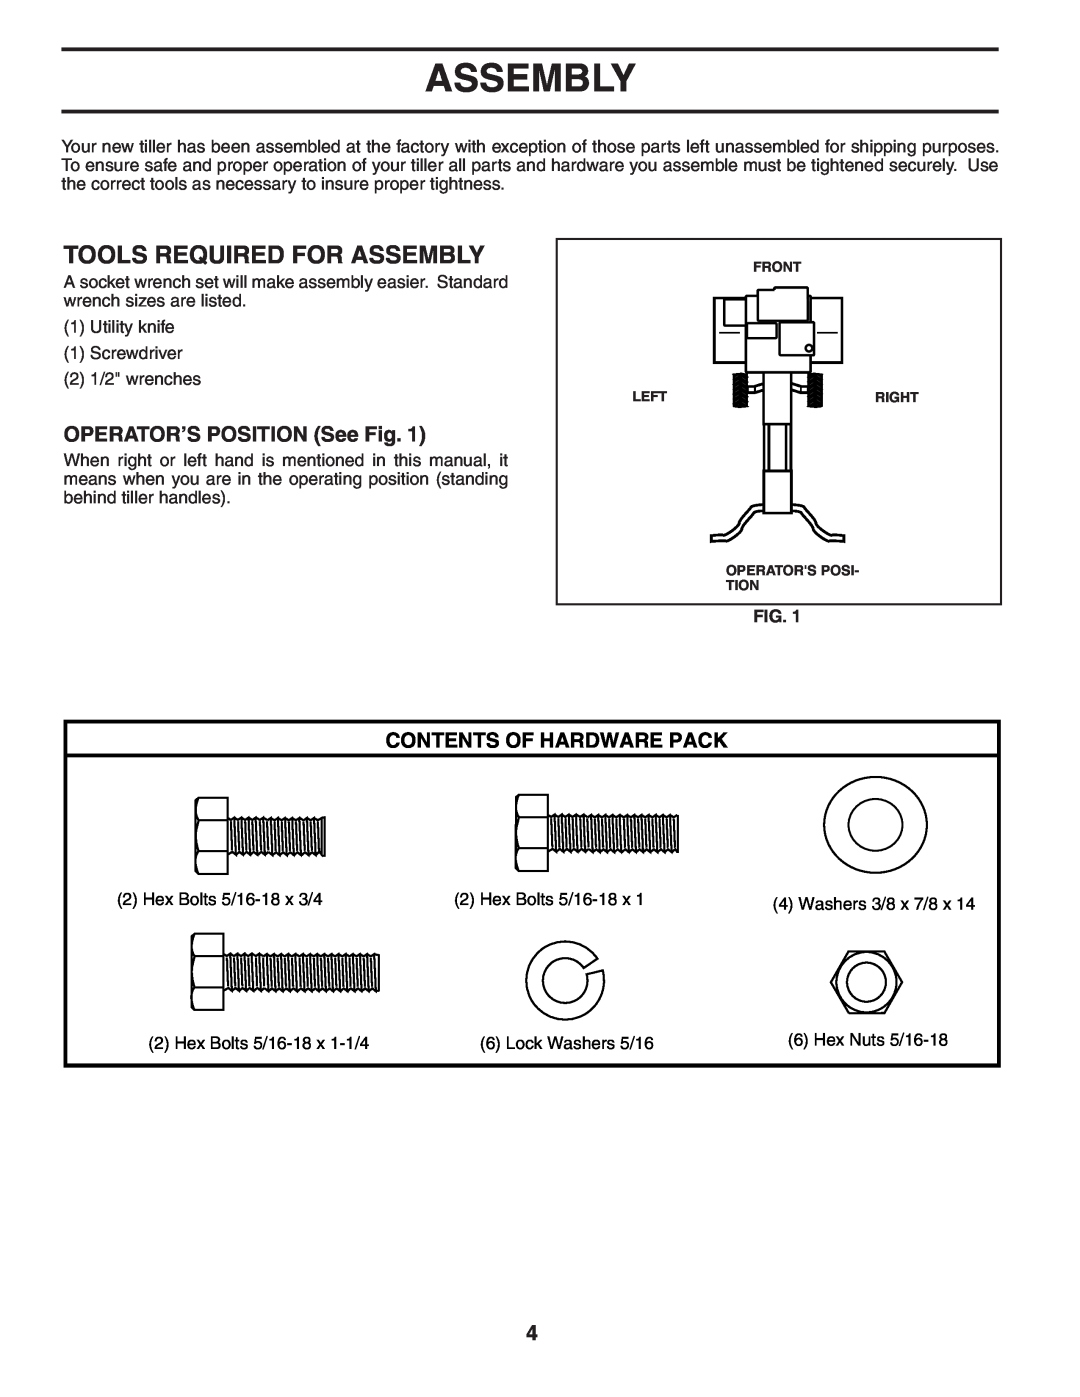 Poulan HDF550L owner manual Tools Required For Assembly, OPERATOR’S POSITION See Fig, Contents Of Hardware Pack 